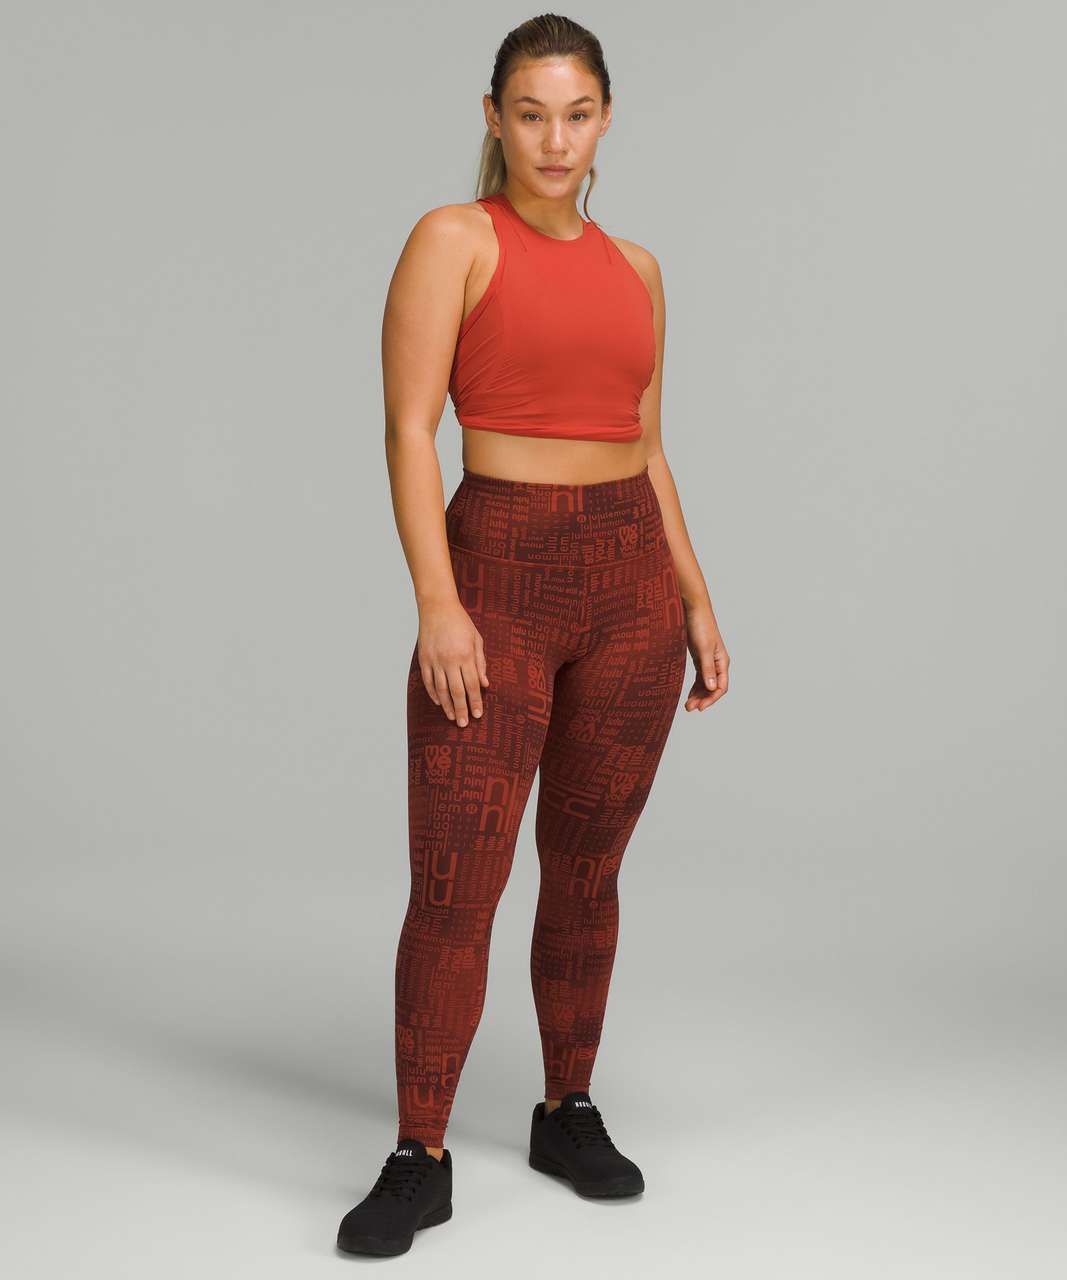 Lululemon Size 4 Wunder Train HR Tight 25 Ombre Red LLBR Everlux Hi Rise  Pant